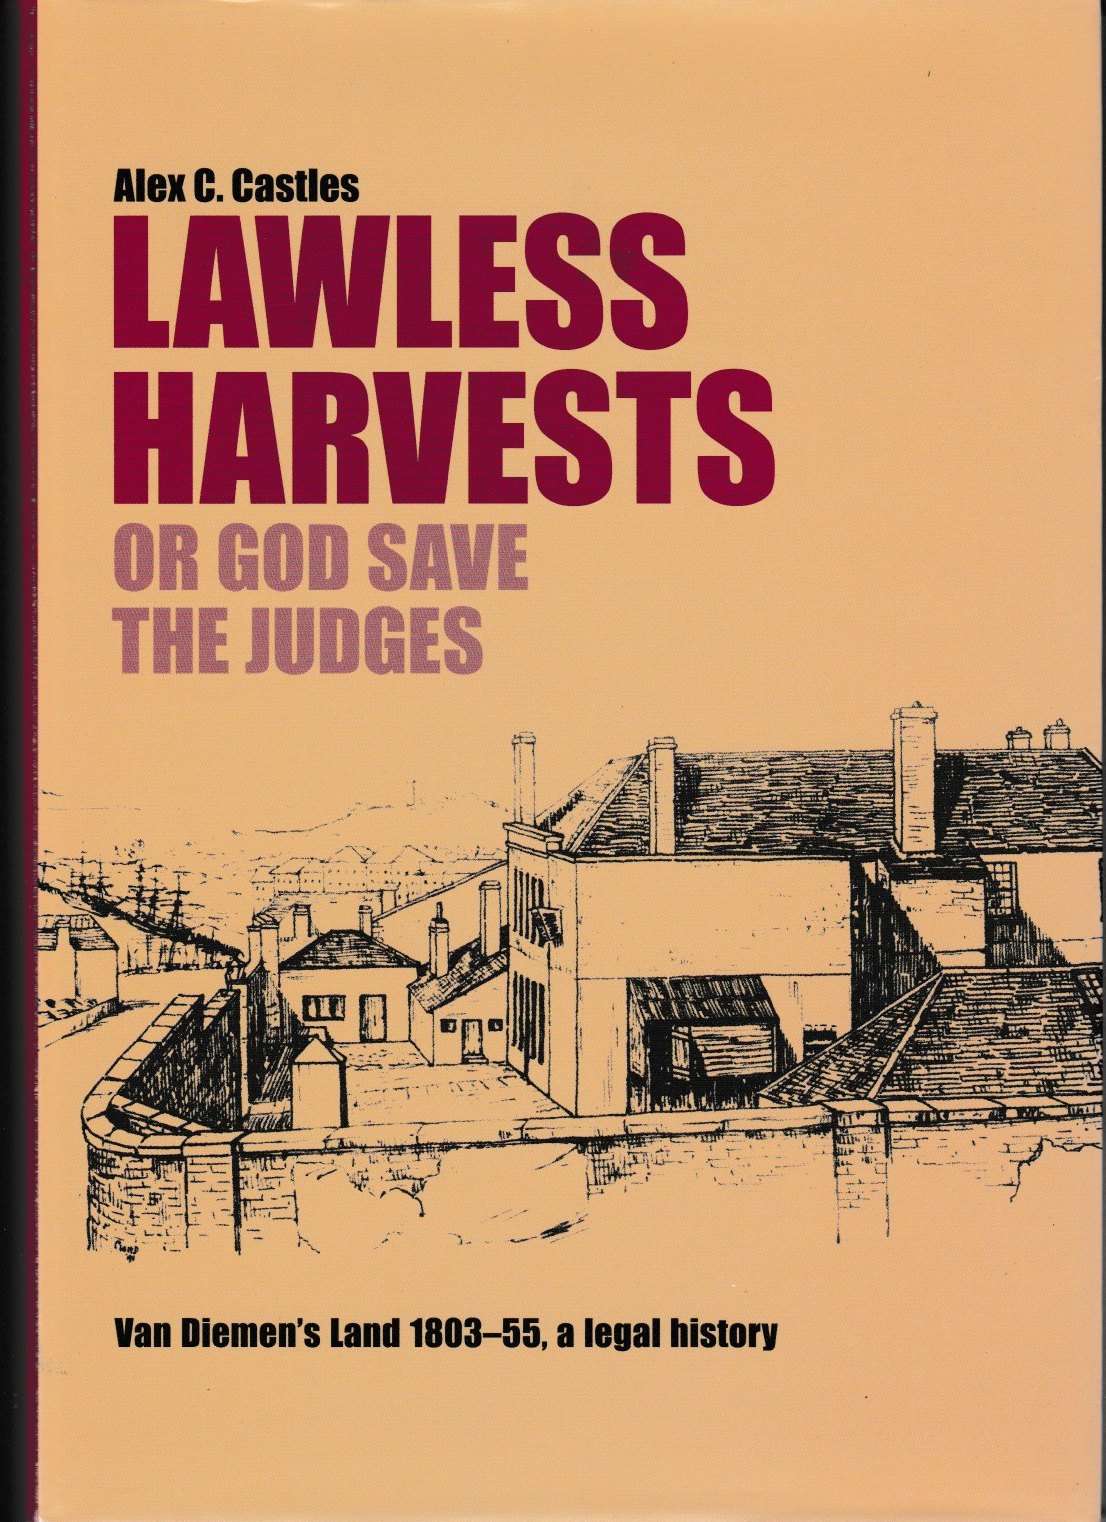 Lawless Harvests or God Save the Judges